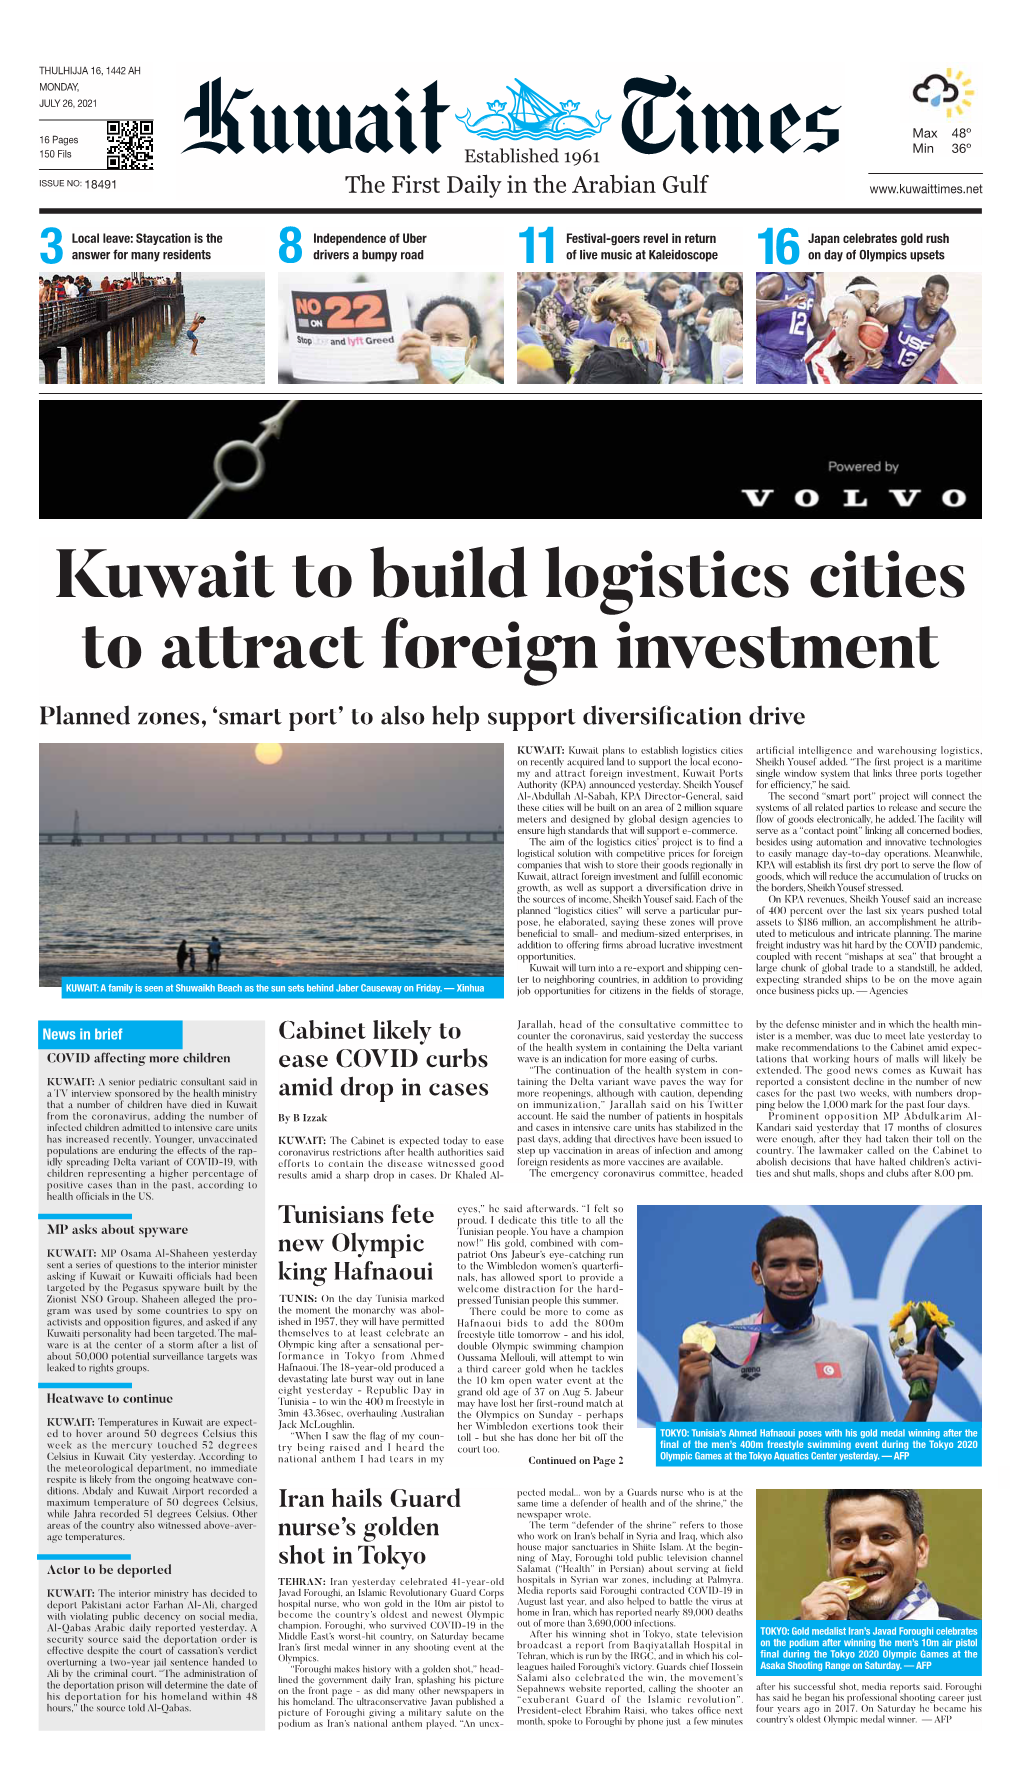 Kuwait to Build Logistics Cities to Attract Foreign Investment Planned Zones, ‘Smart Port’ to Also Help Support Diversification Drive